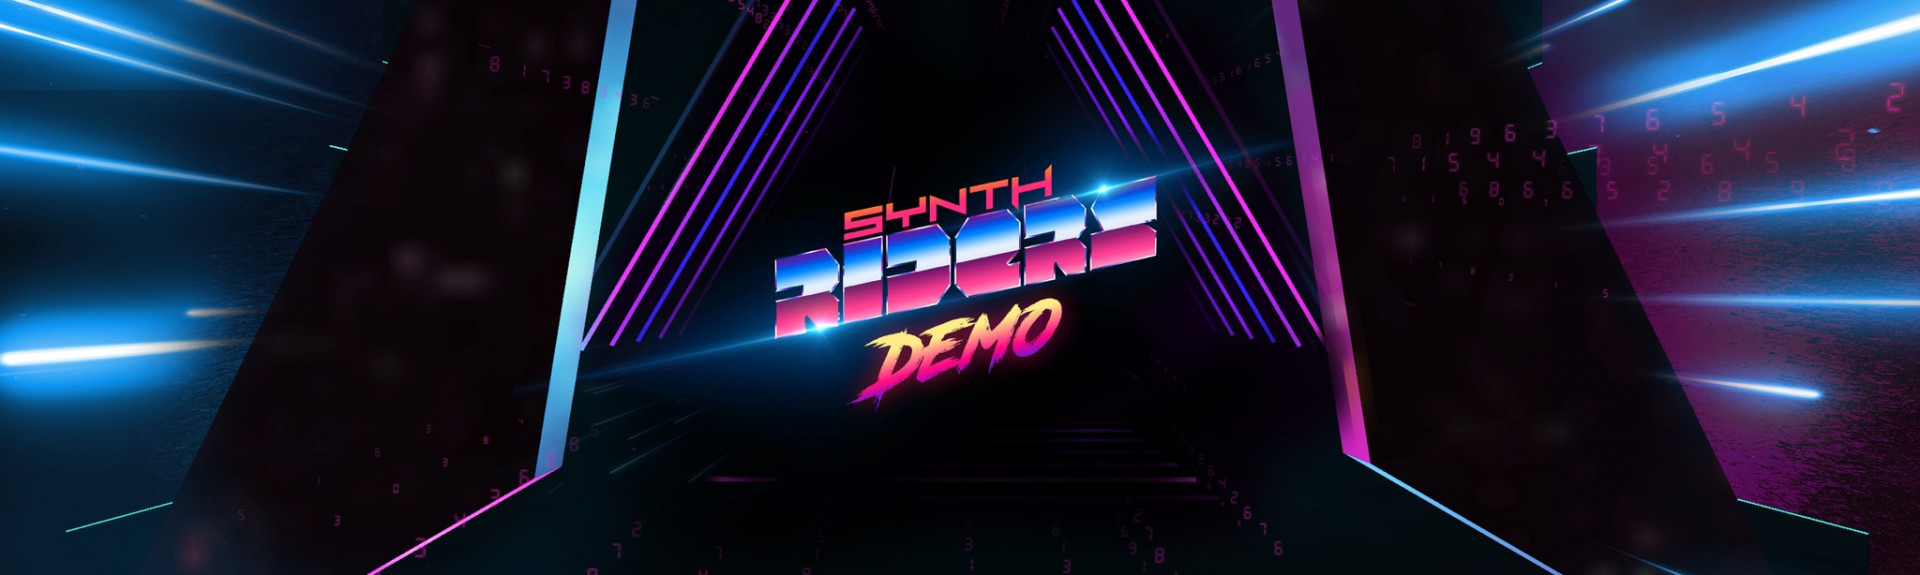 Synth Riders Demo